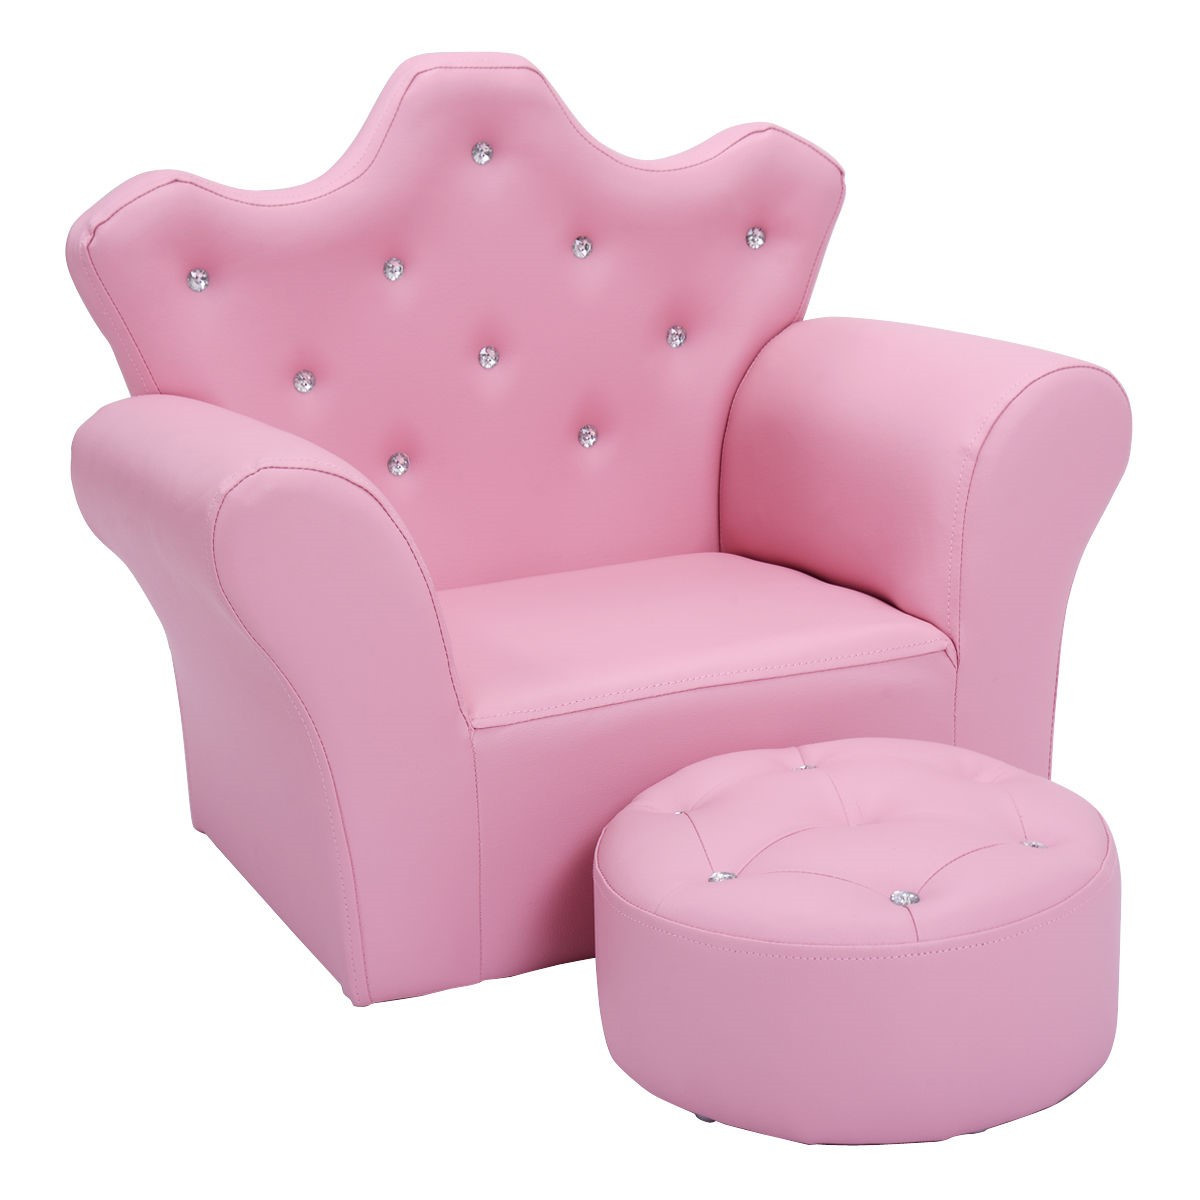 Kids Sofa And Chair
 Costway Pink Kids Sofa Armrest Chair Couch Children